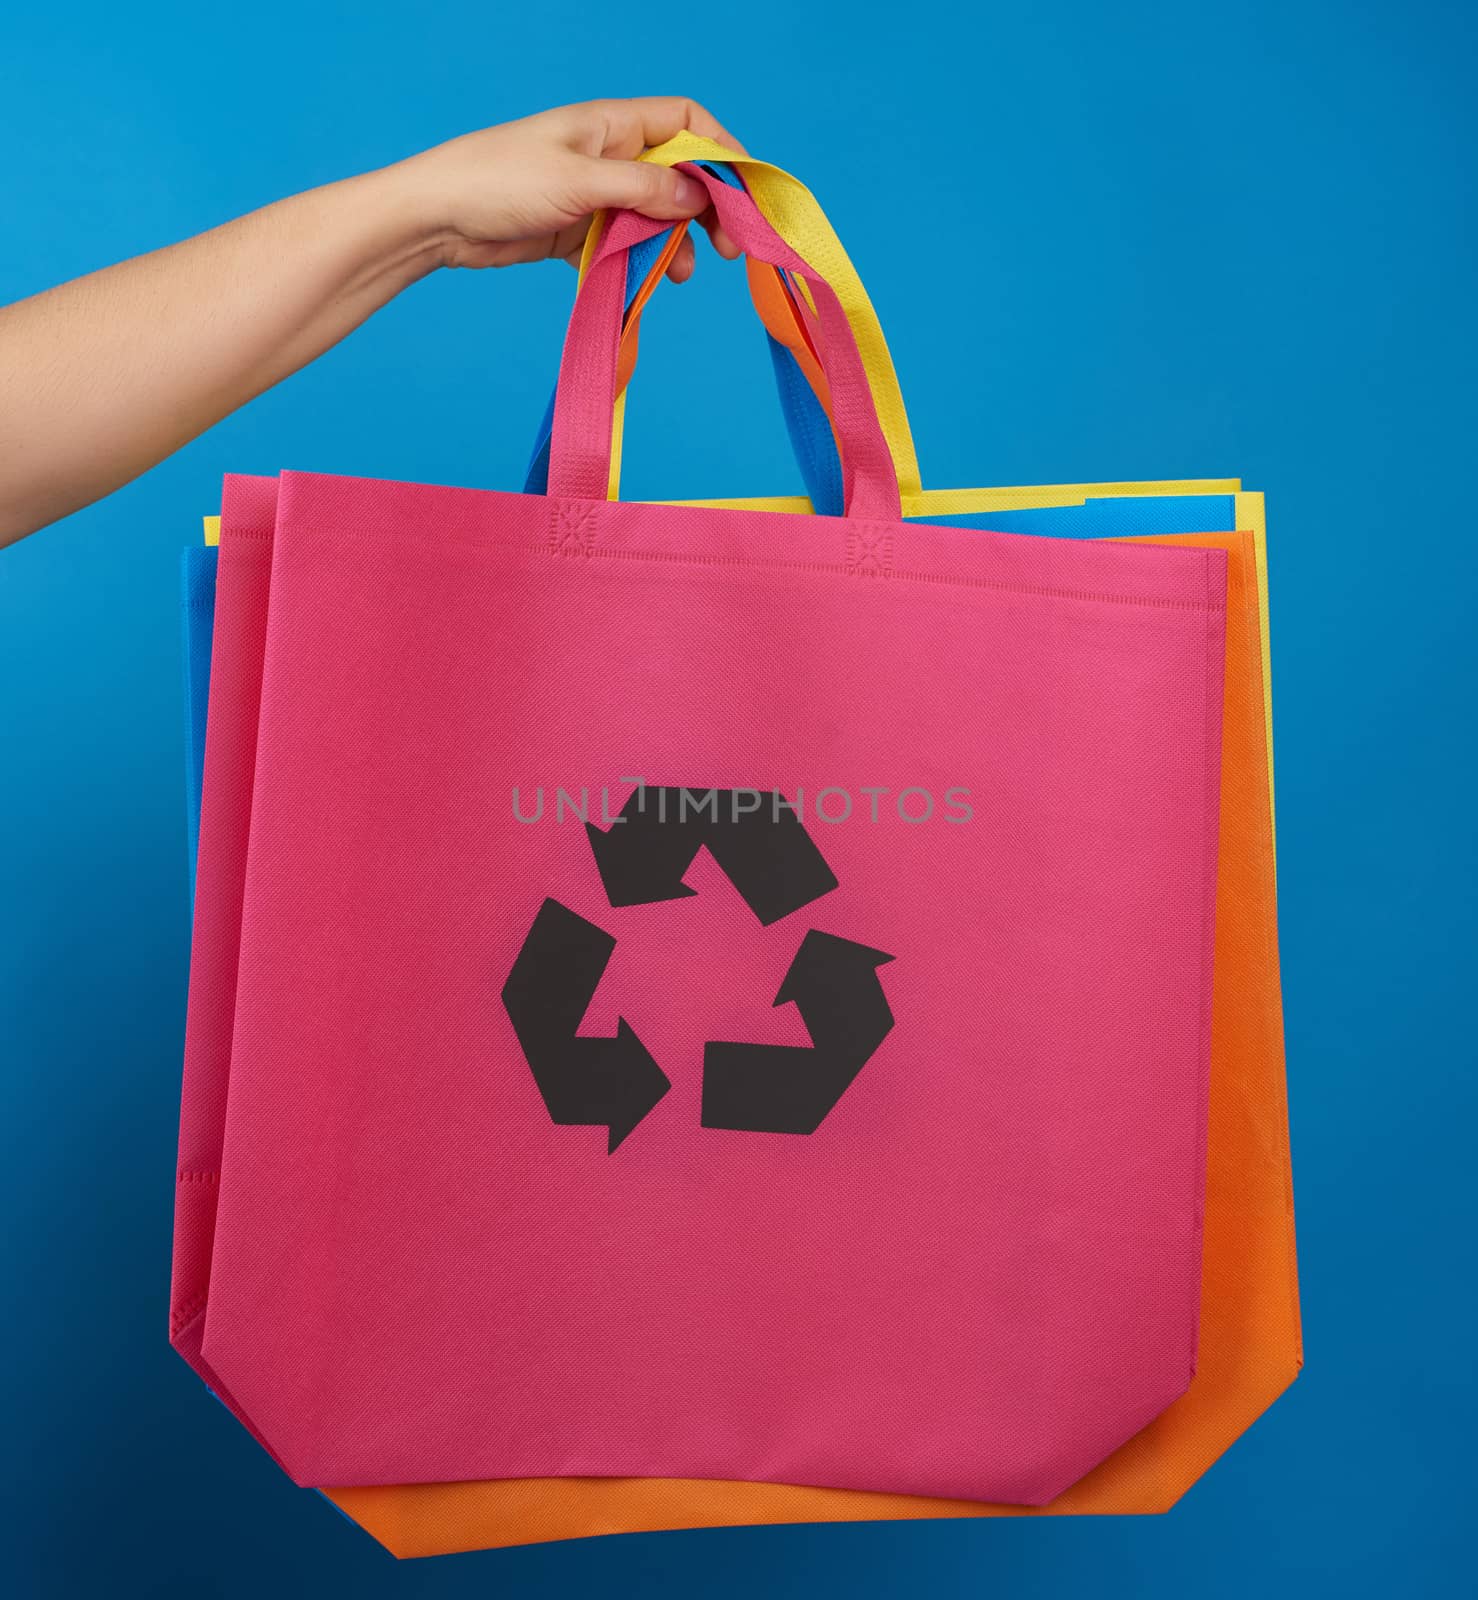 woman's hand holds a pink viscose ecology bag, recyclable material, blue background